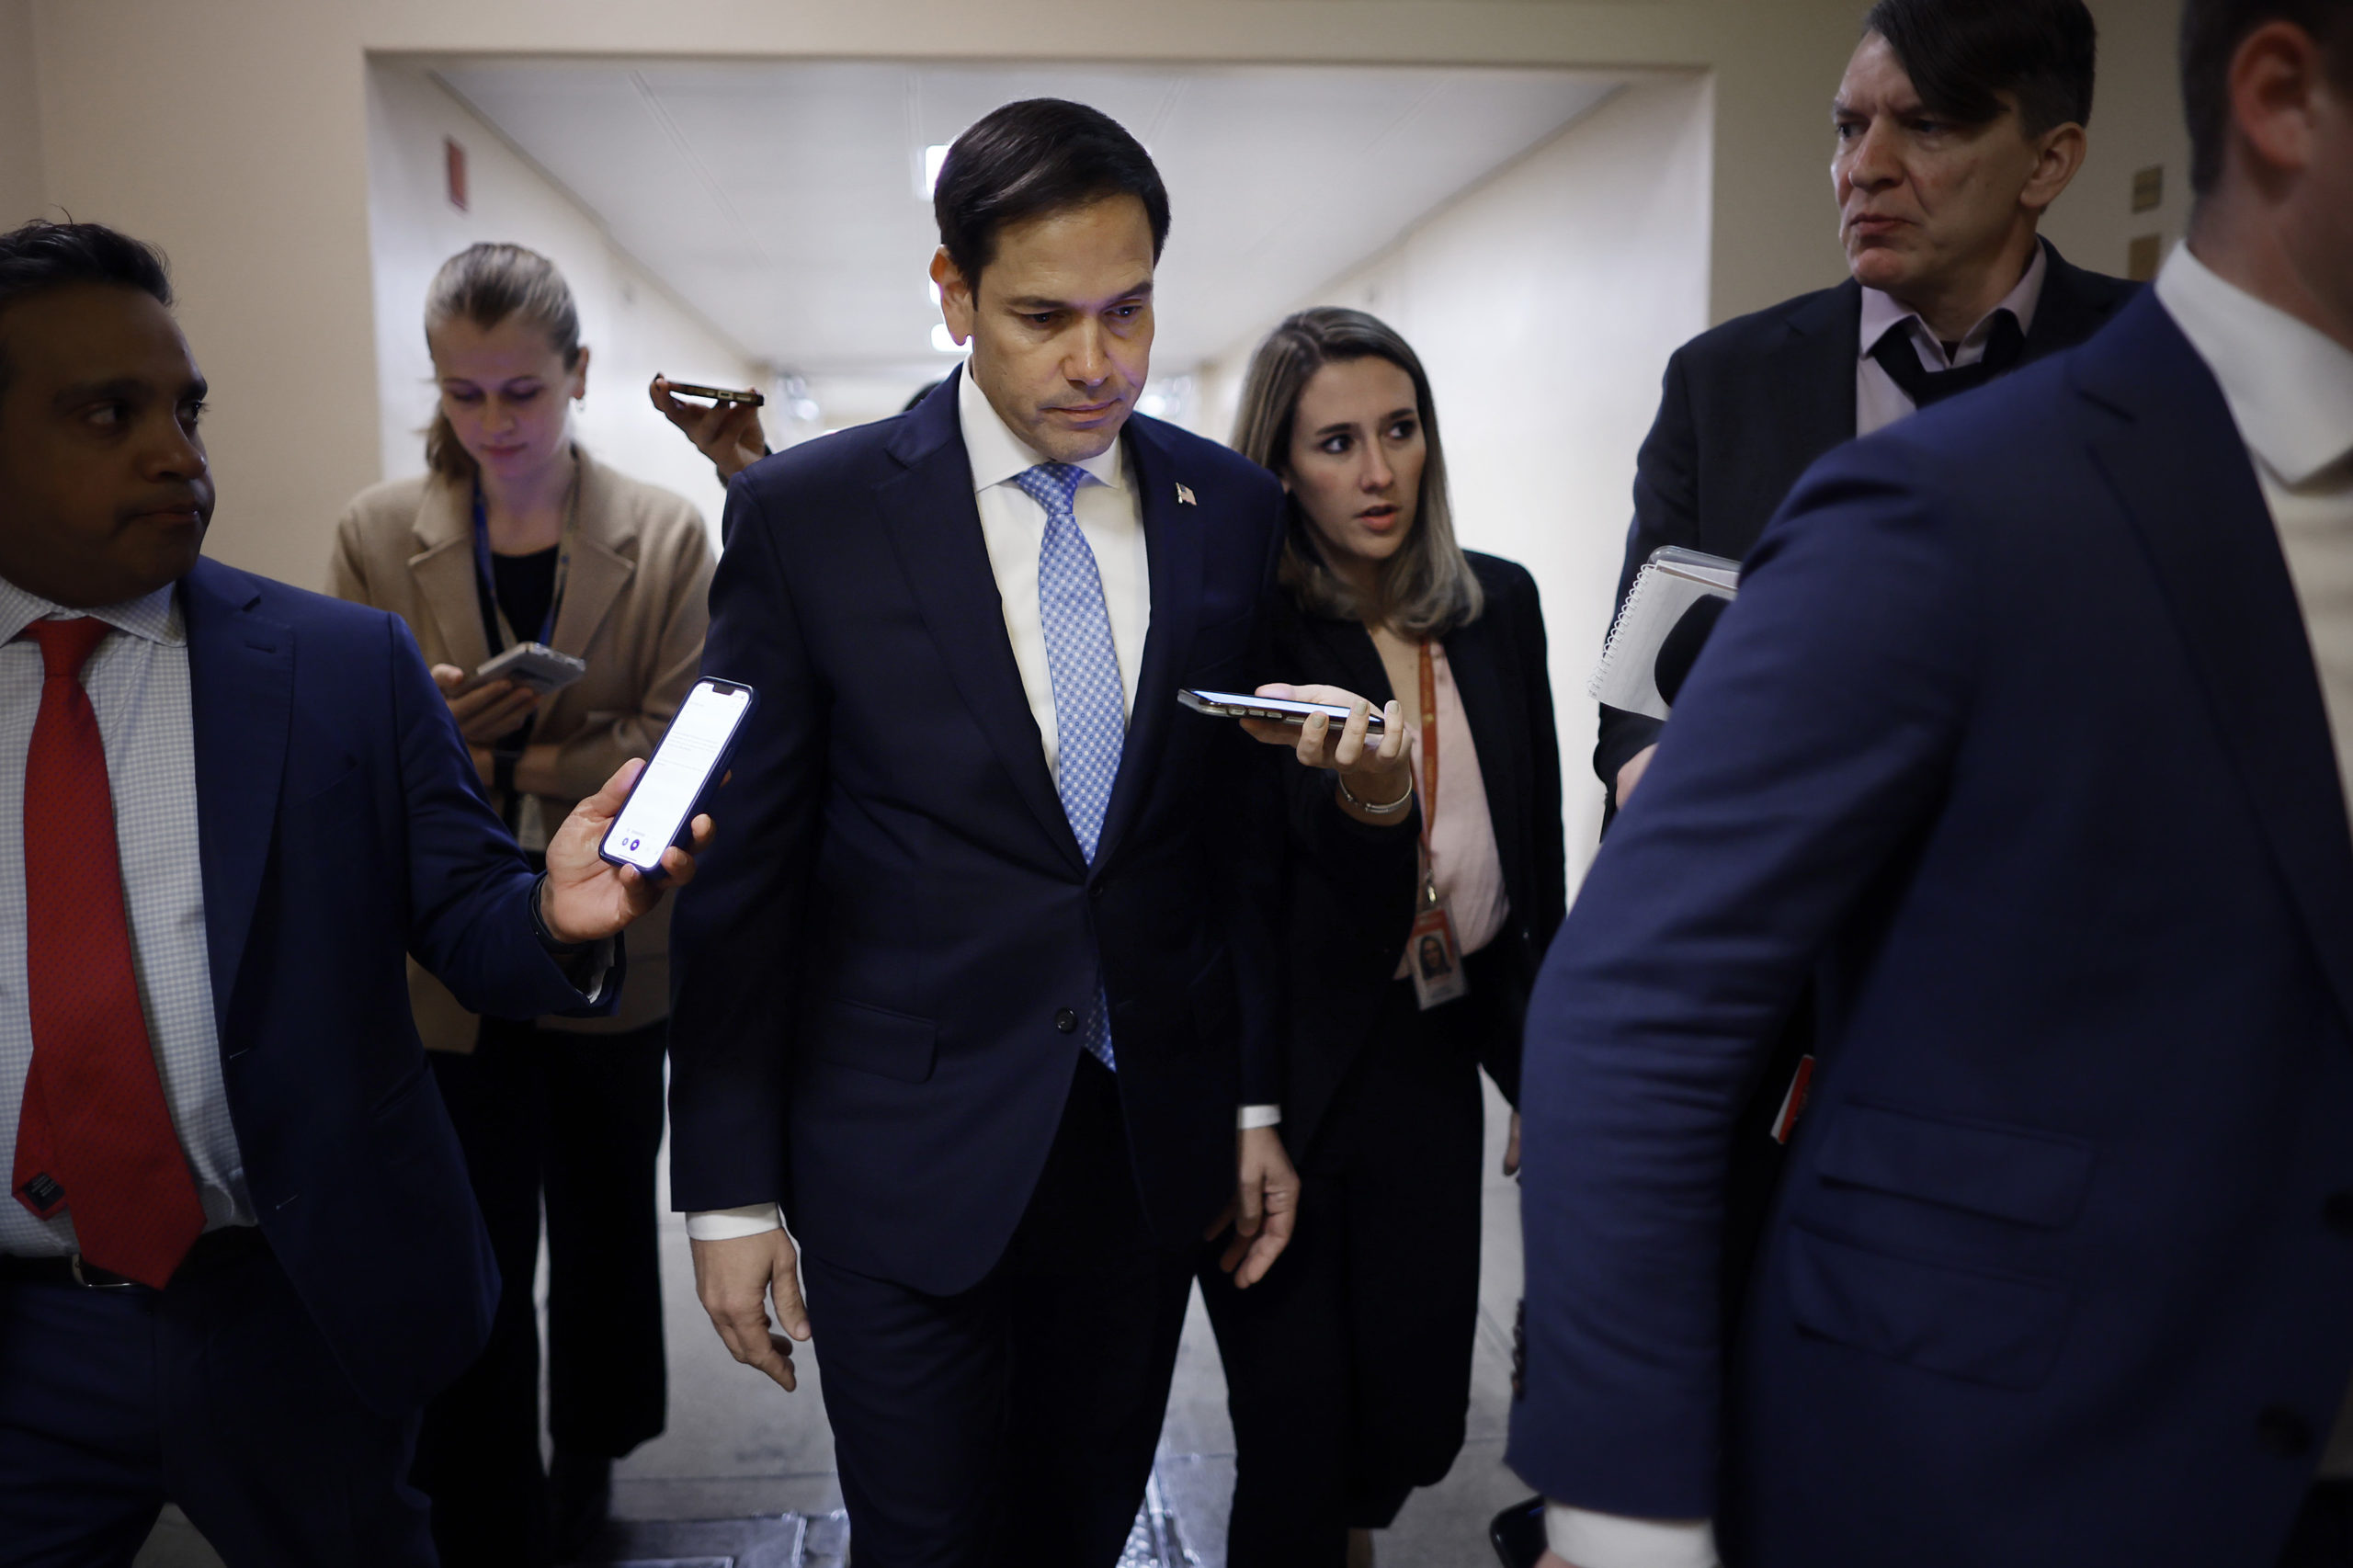 Senate Select Committee on Intelligence Vice Chairman Marco Rubio (R-FL) is beset by reporters as he walks through the basement of the U.S. Capitol on February 28, 2023 in Washington, DC. Members of the "Gang of 8," including Rubio, will be briefed on the documents with classified markings that were found at the residences and offices of former President Donald Trump, President Joe Biden and former Vice President Mike Pence. (Photo by Chip Somodevilla/Getty Images)